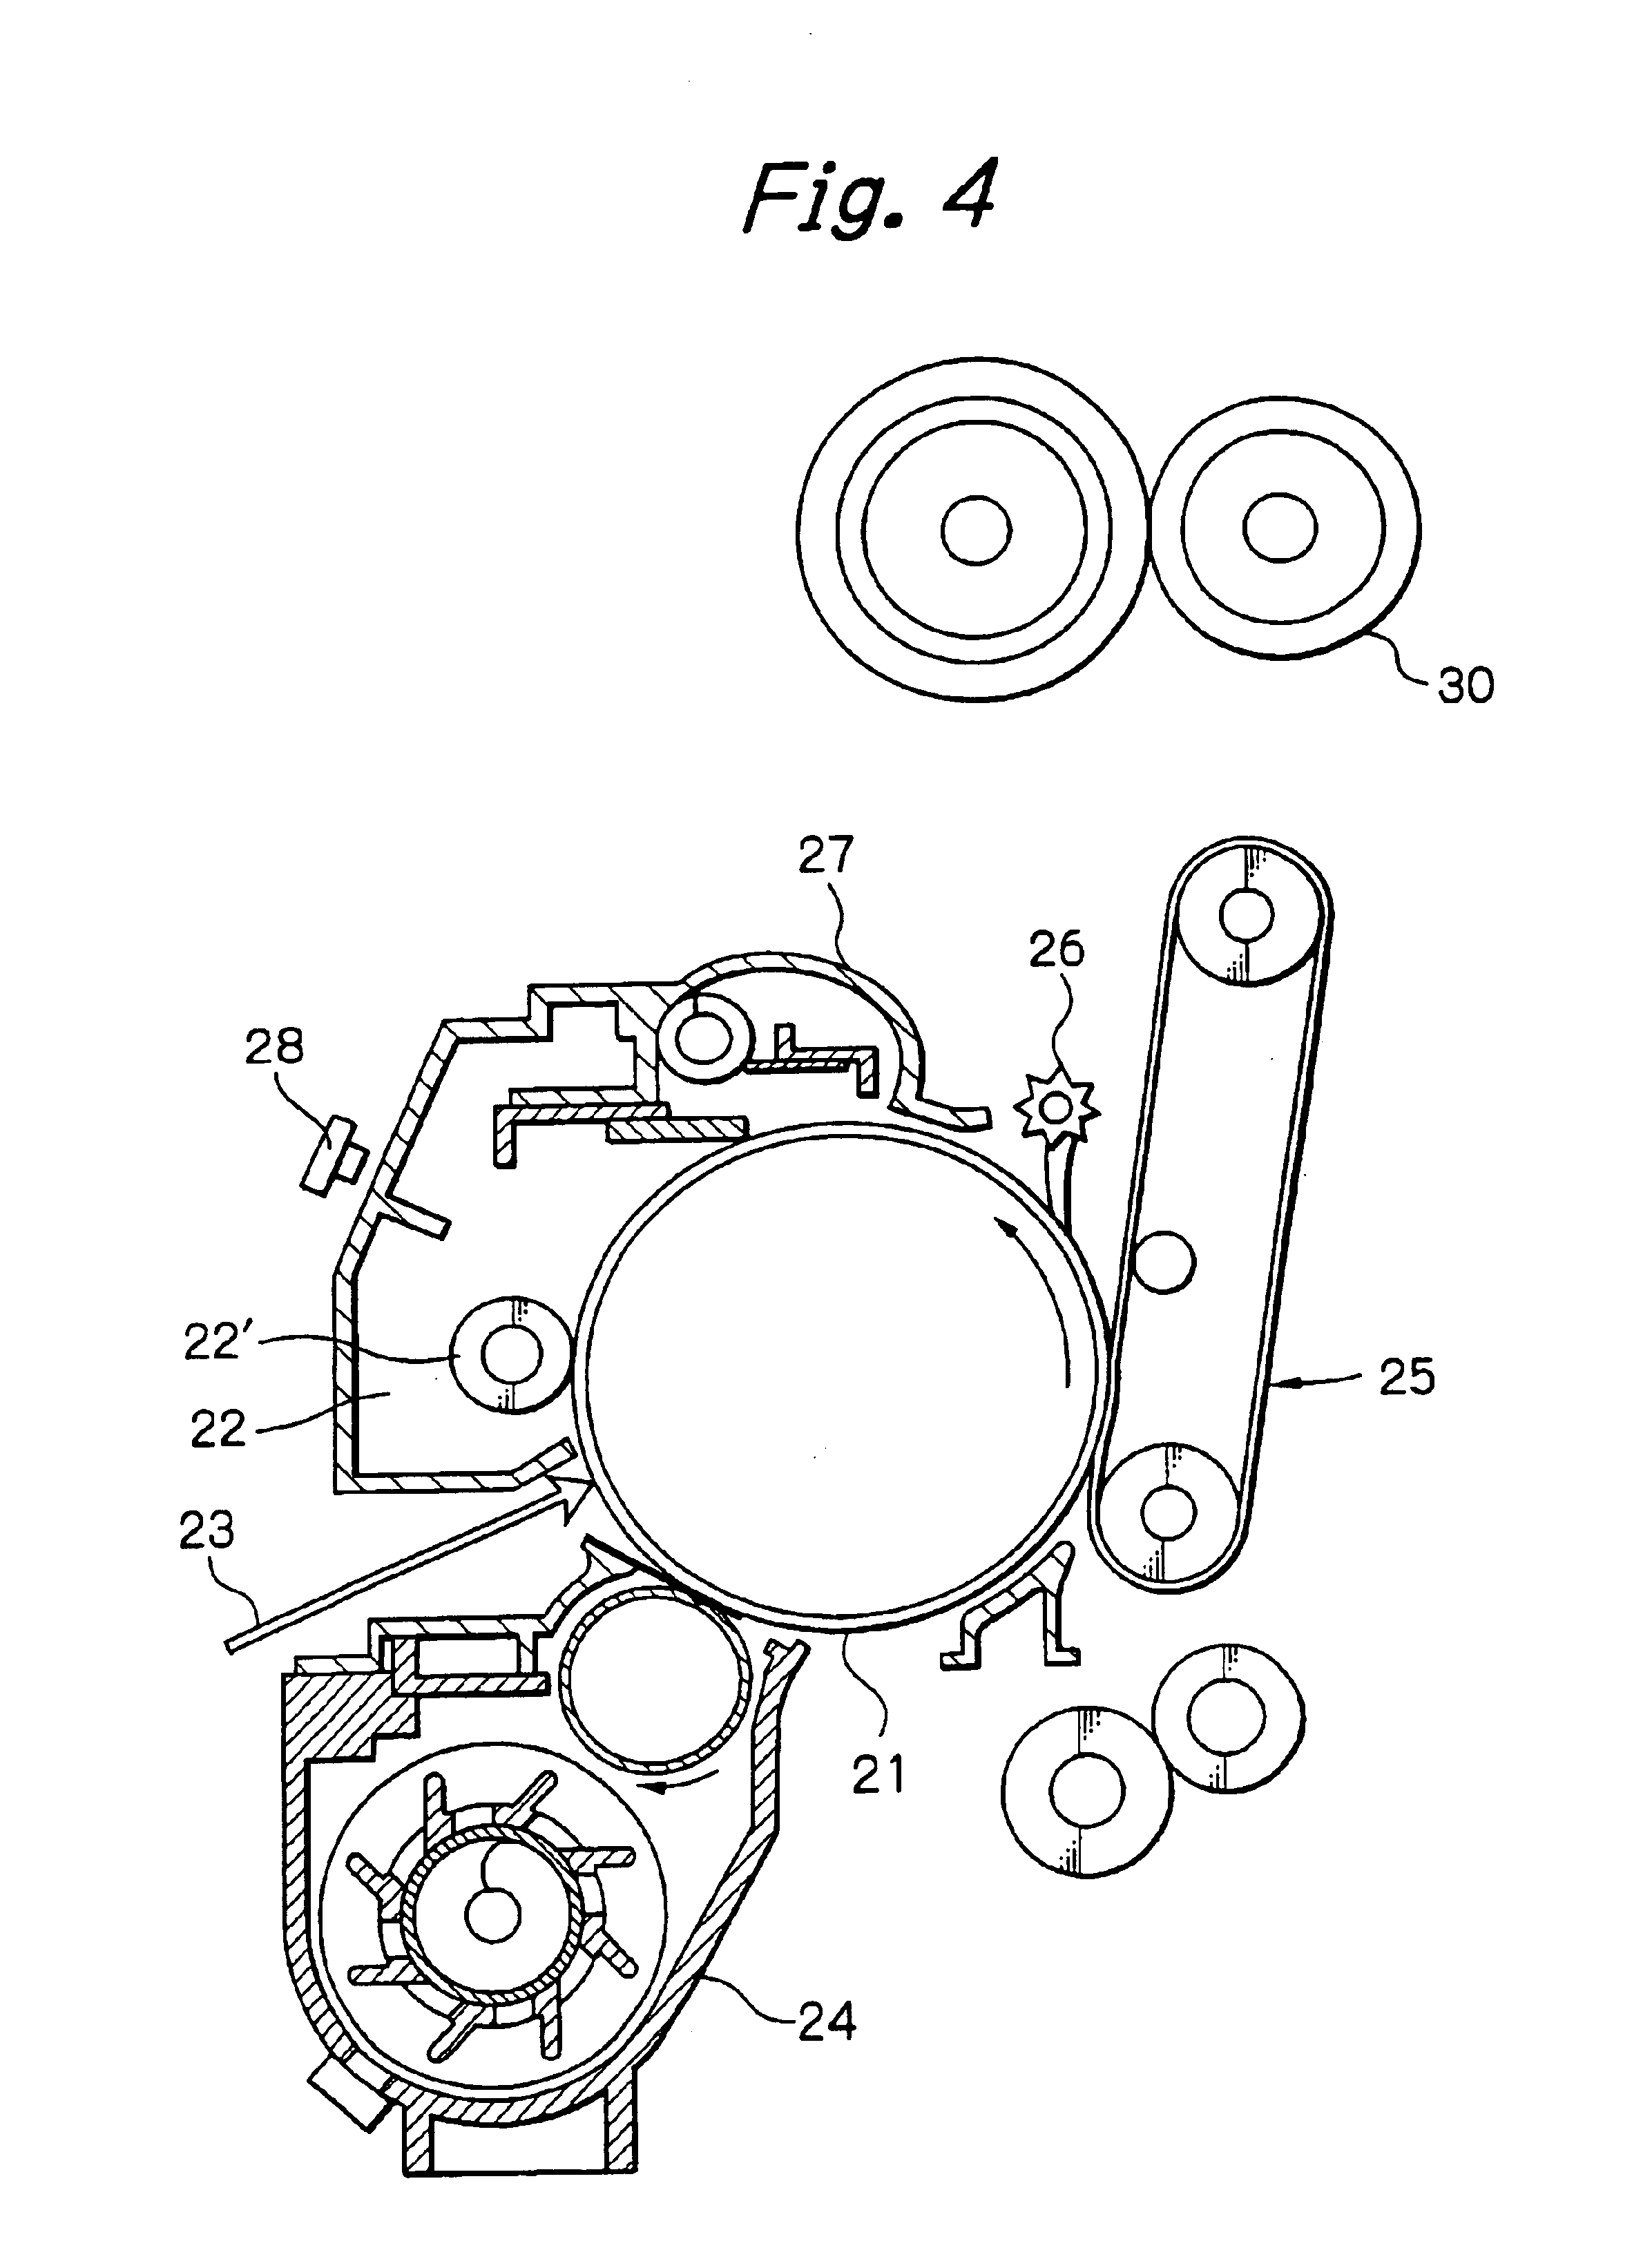 Induction heating type fixing device for an image forming apparatus and induction heating coil therefor